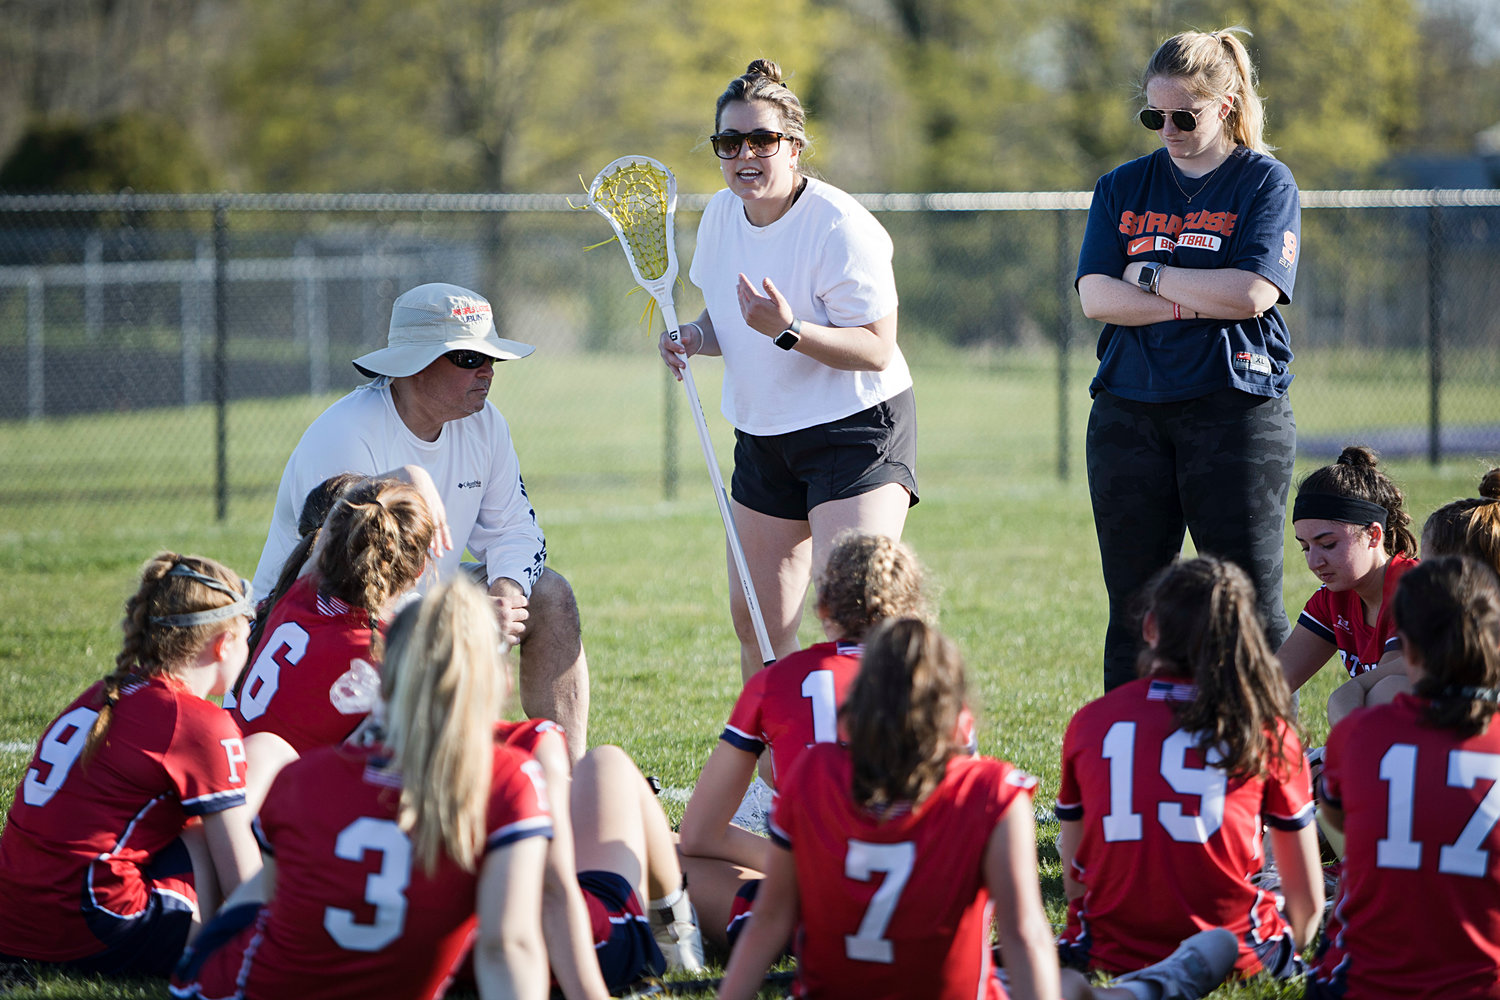 Portsmouth head coach Amelia McHugh talks strategy with her team at halftime.